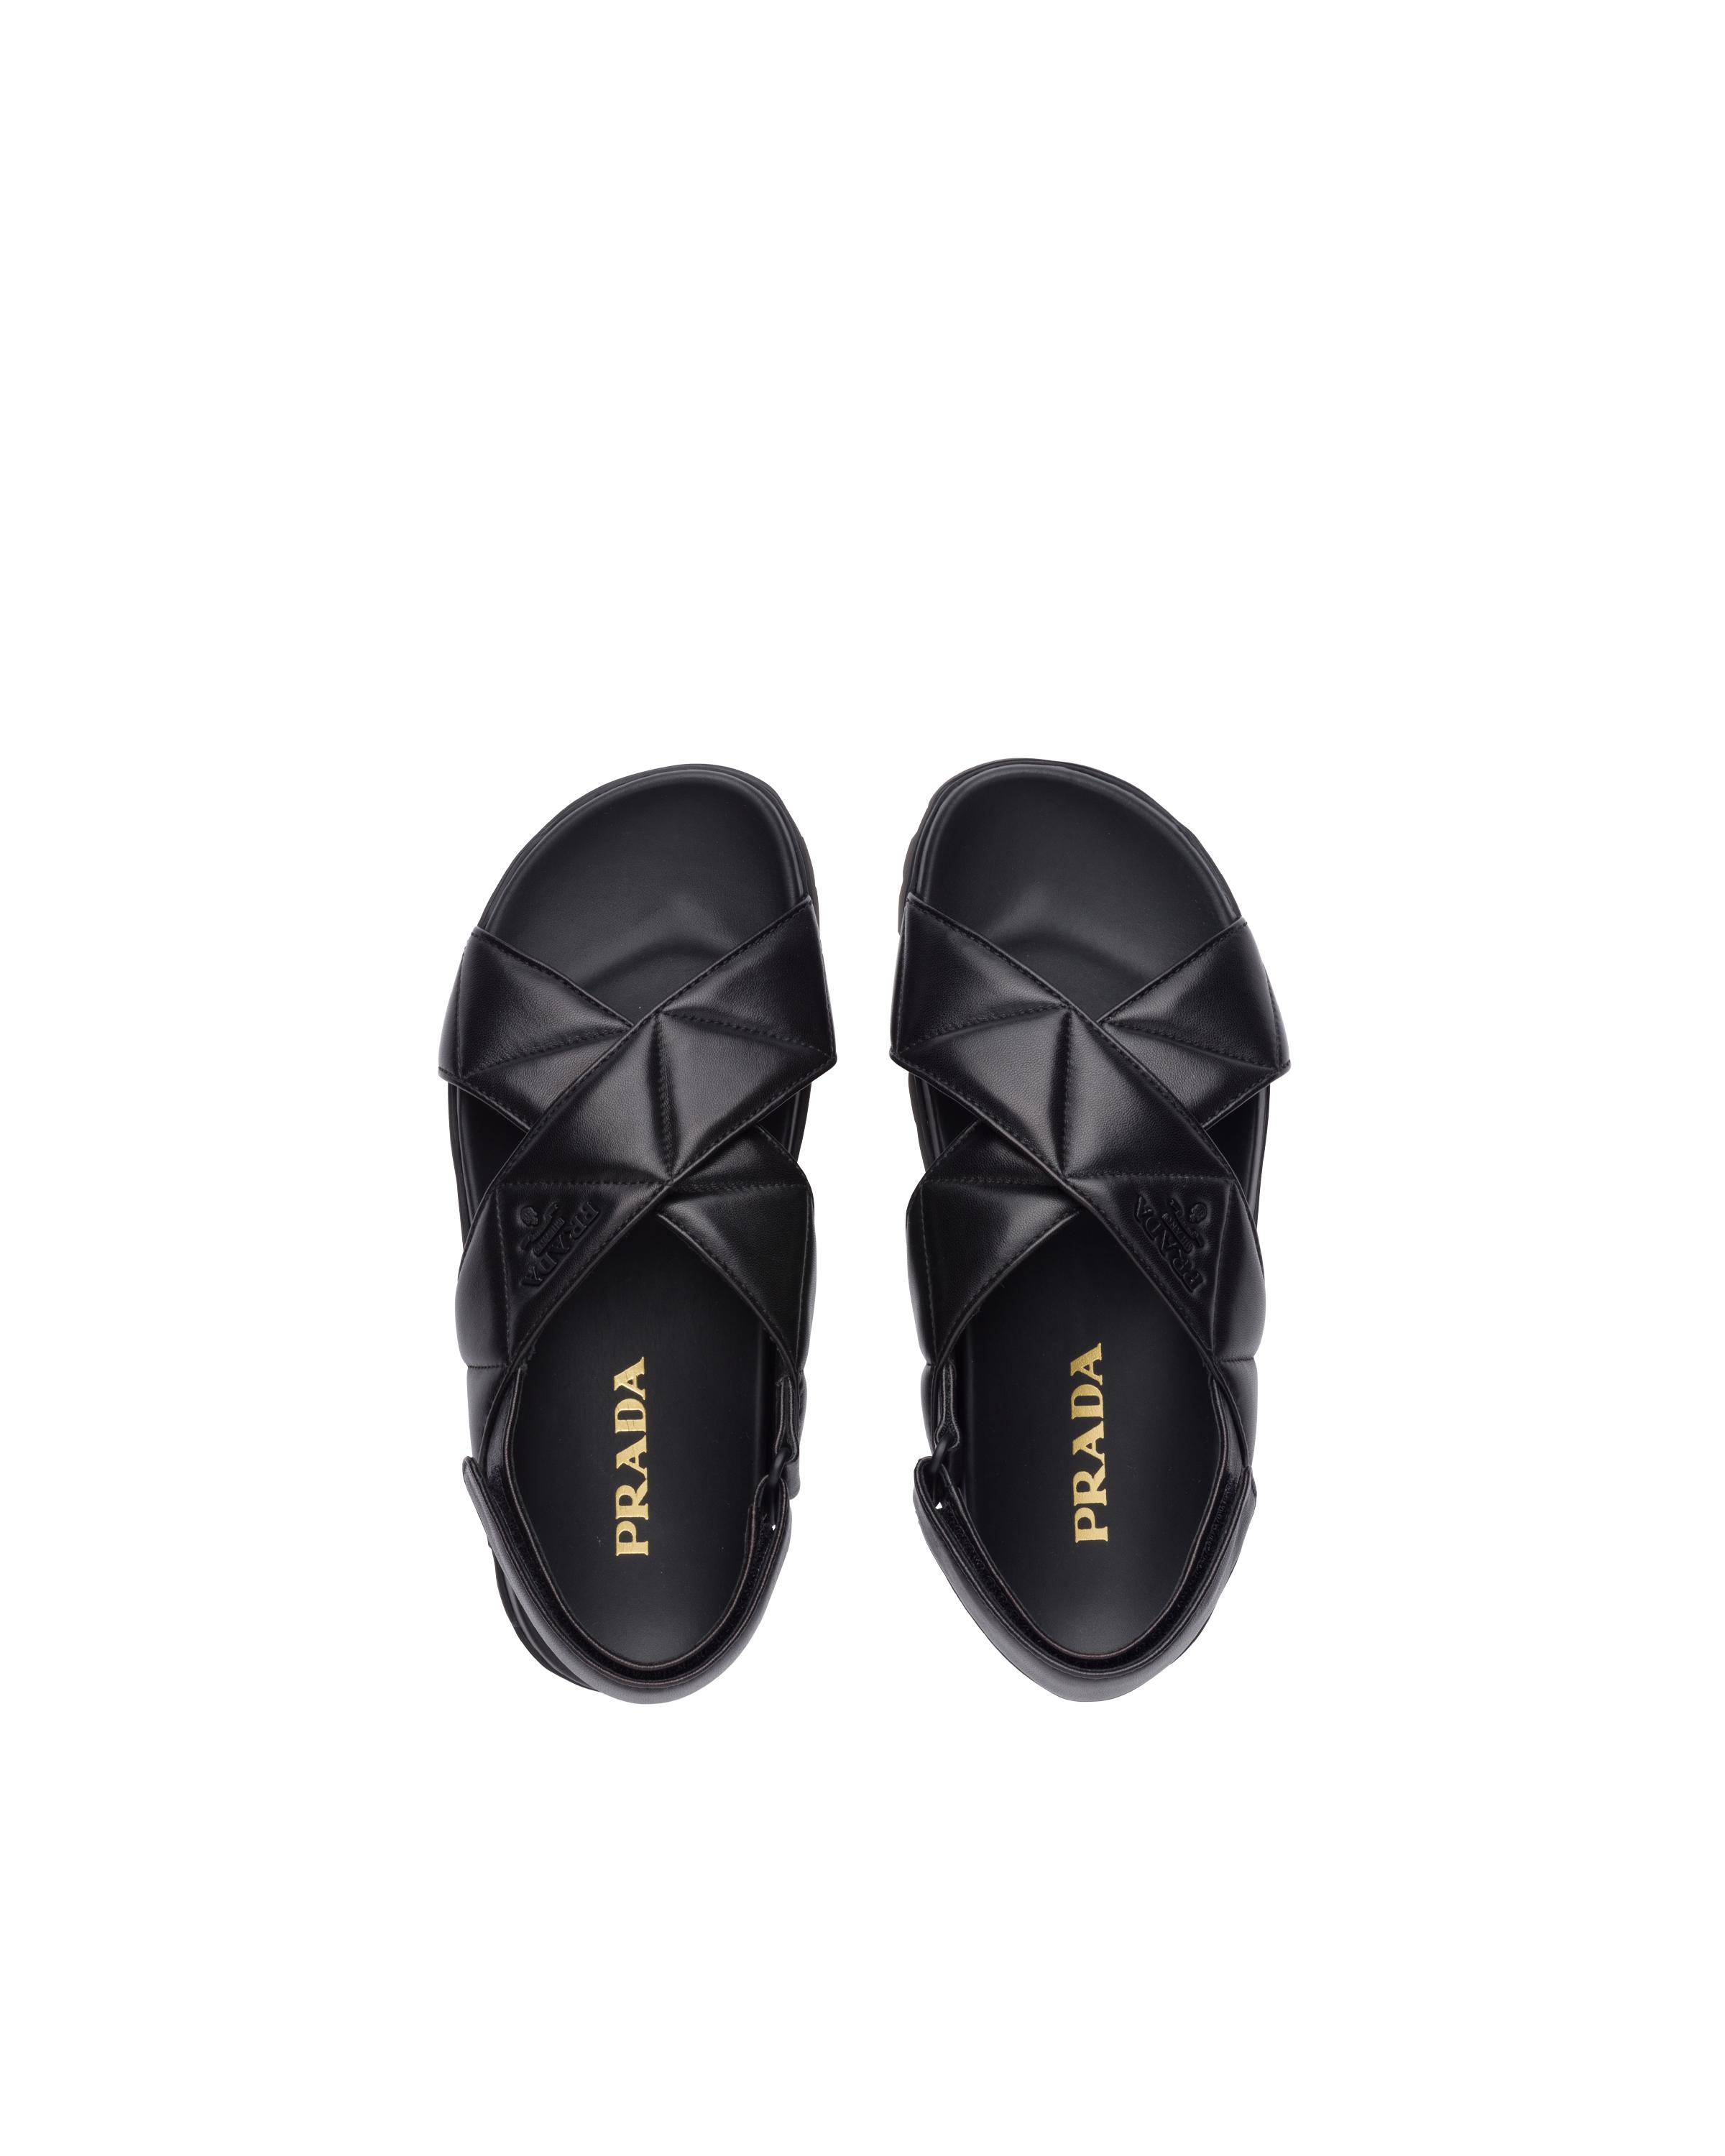 Prada Sporty Quilted Nappa Leather Sandals in Black | Lyst